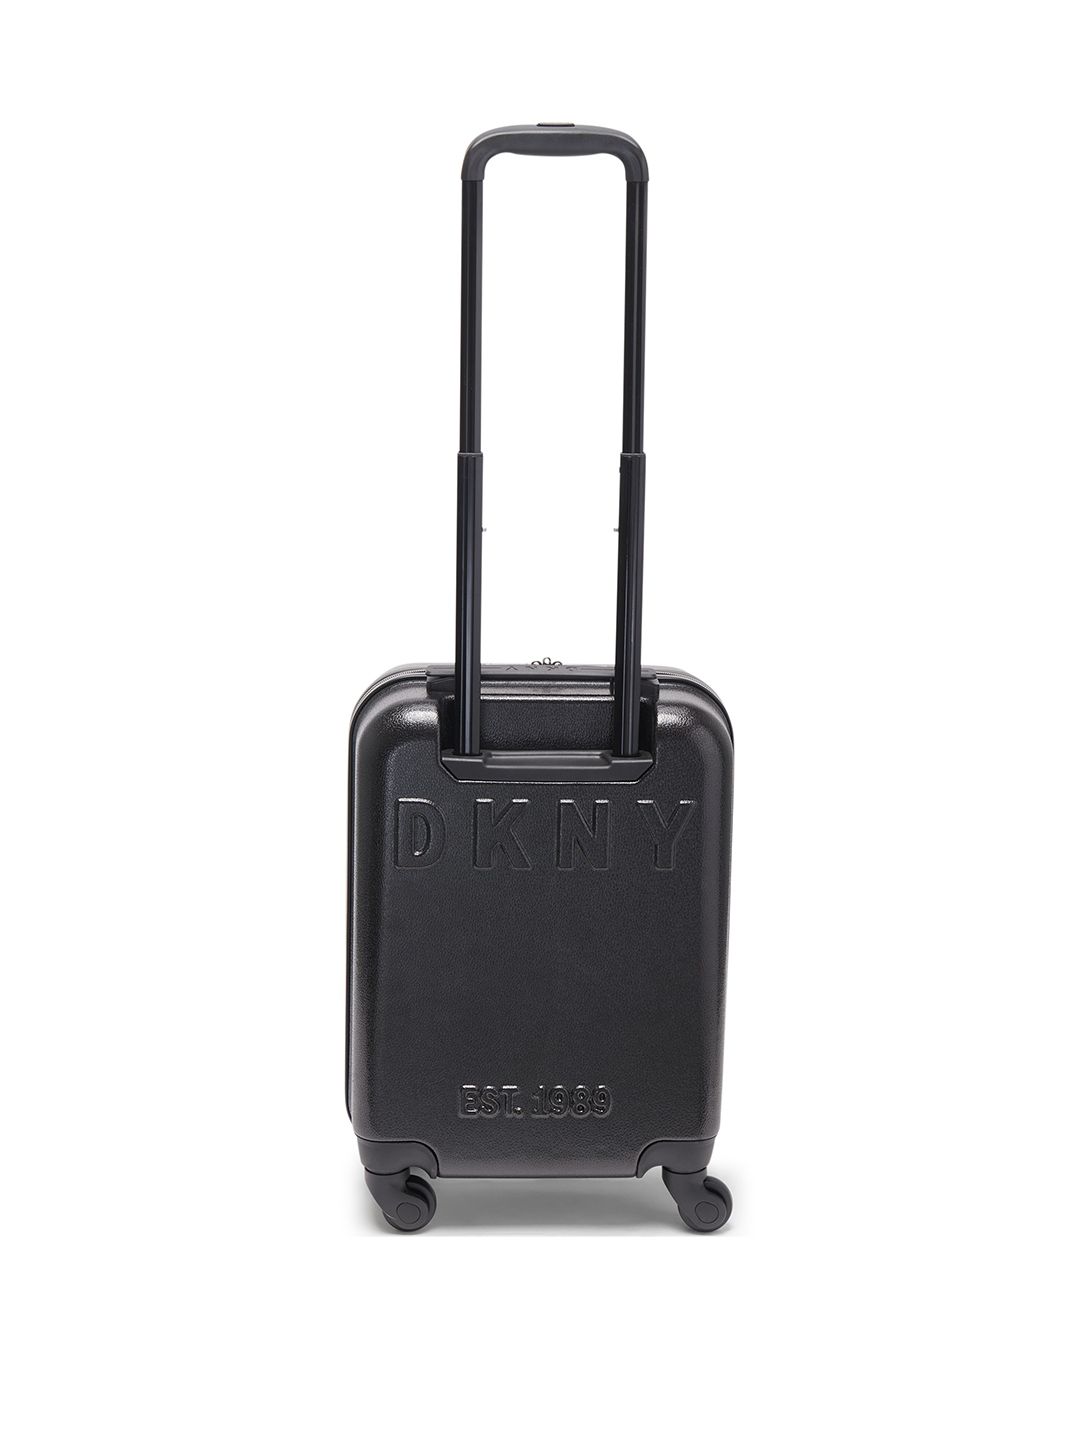 DKNY Black Textured Hard Cabin Suitcase Price in India